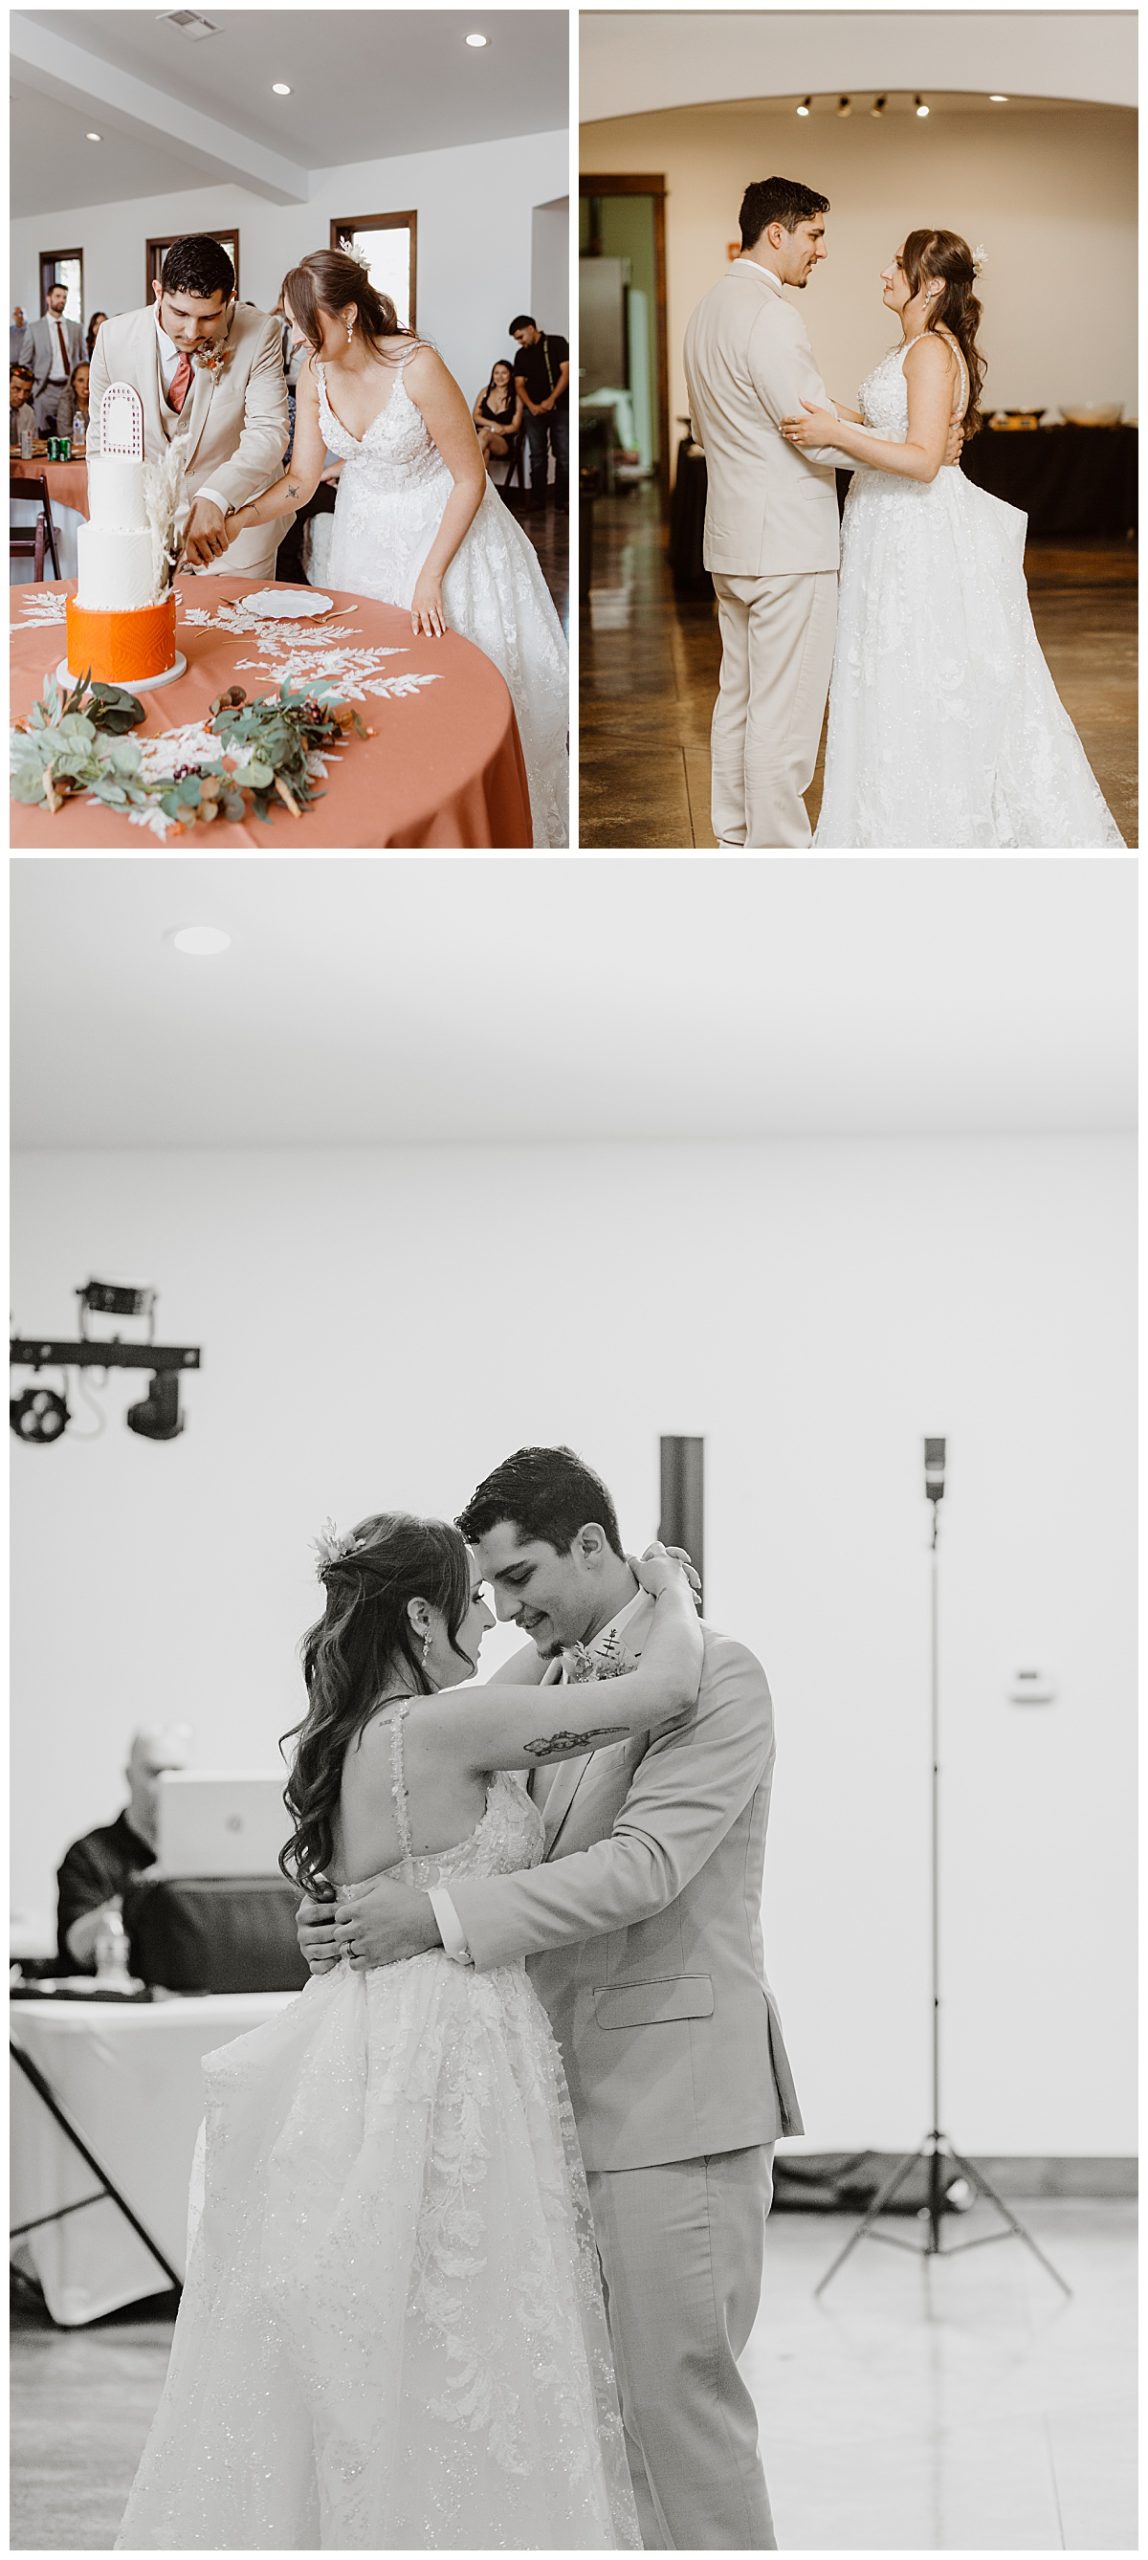 Newlyweds dance together and cut cake by Ellie Chavez Photography 